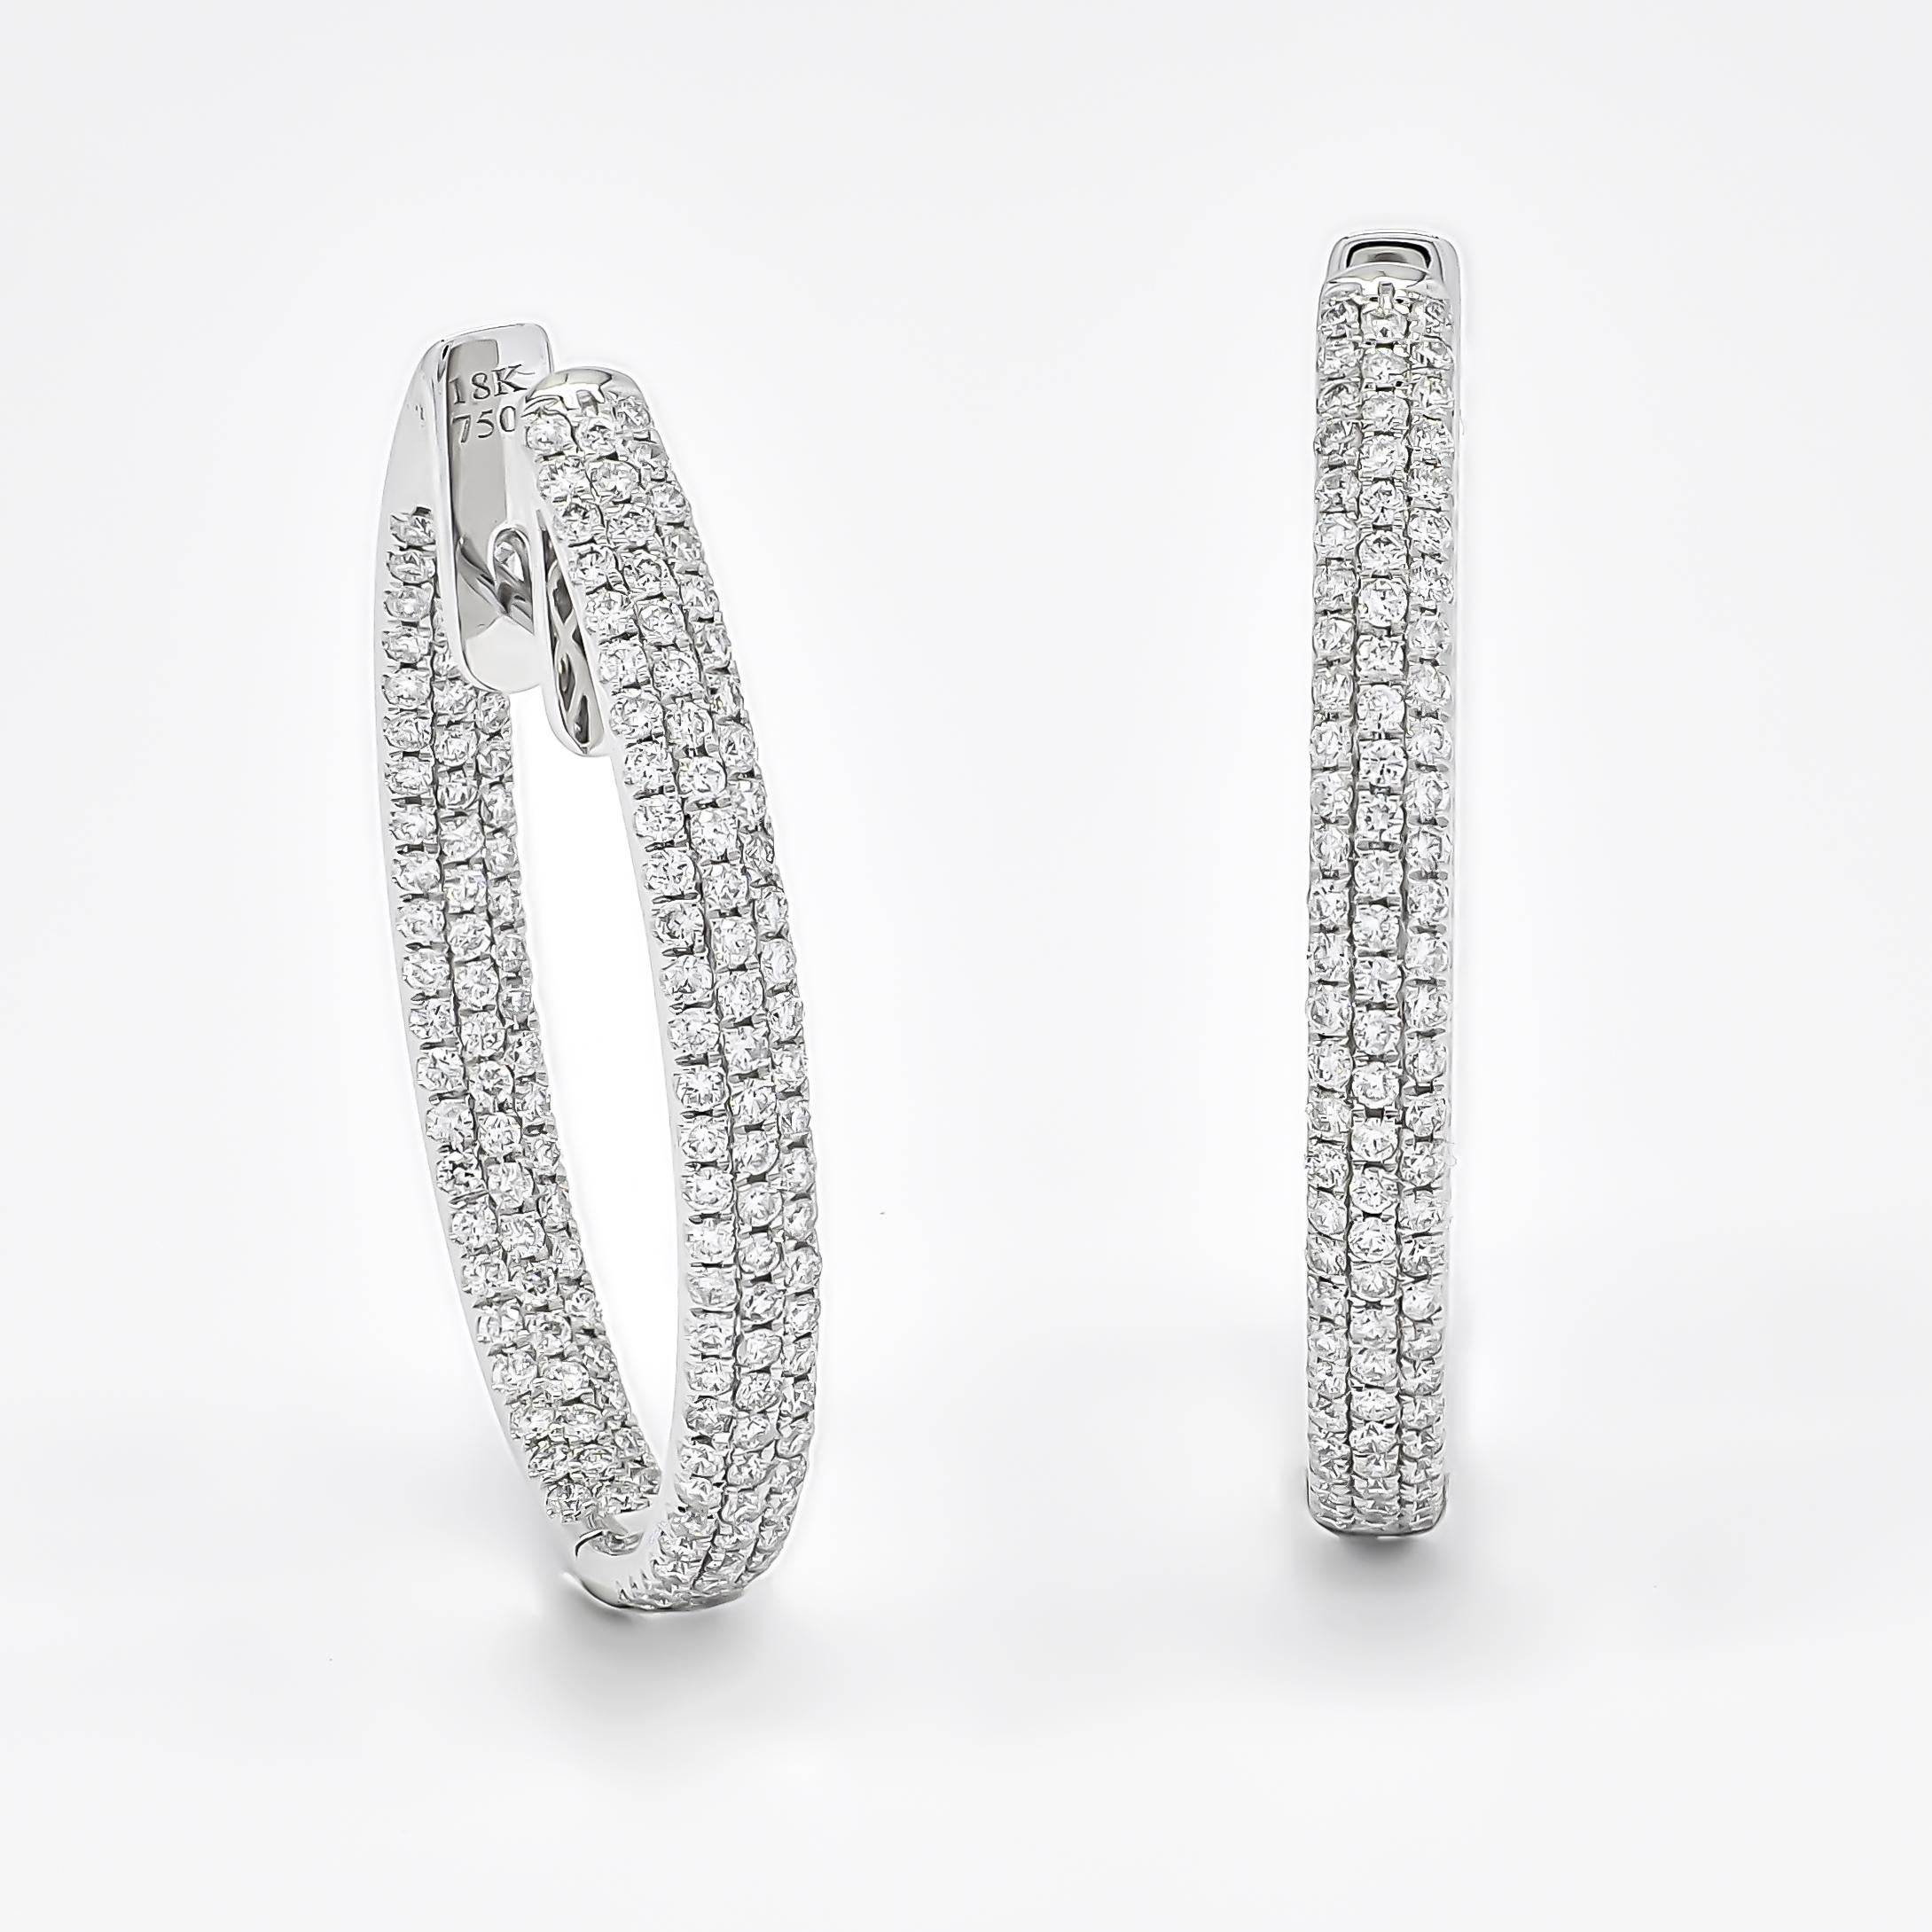 Modern  Natural Diamonds 2.75 Carats 18KT White Gold 'In and out' Hoop Earrings For Sale